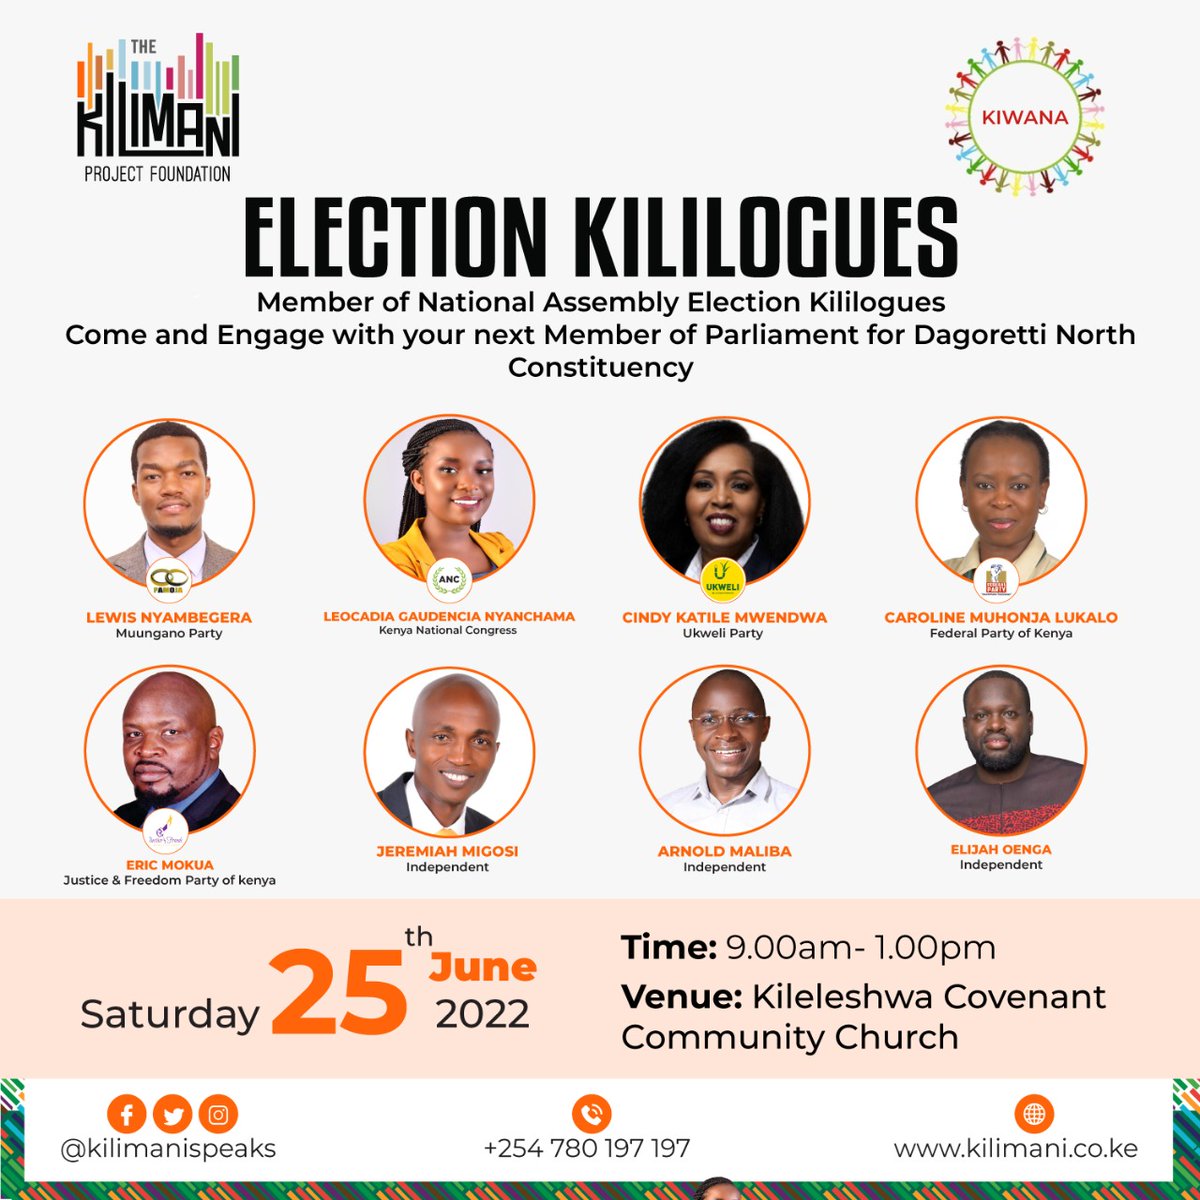 The long awaited debate for Member of National Assembly is on tomorrow.

Looking forward to hosting you together with our counter parts in Kileleshwa as we seek accountable leadership at ward & constituency level!

#ChambuaKiongozi
#Accountableleadership
#ElectionKE2022